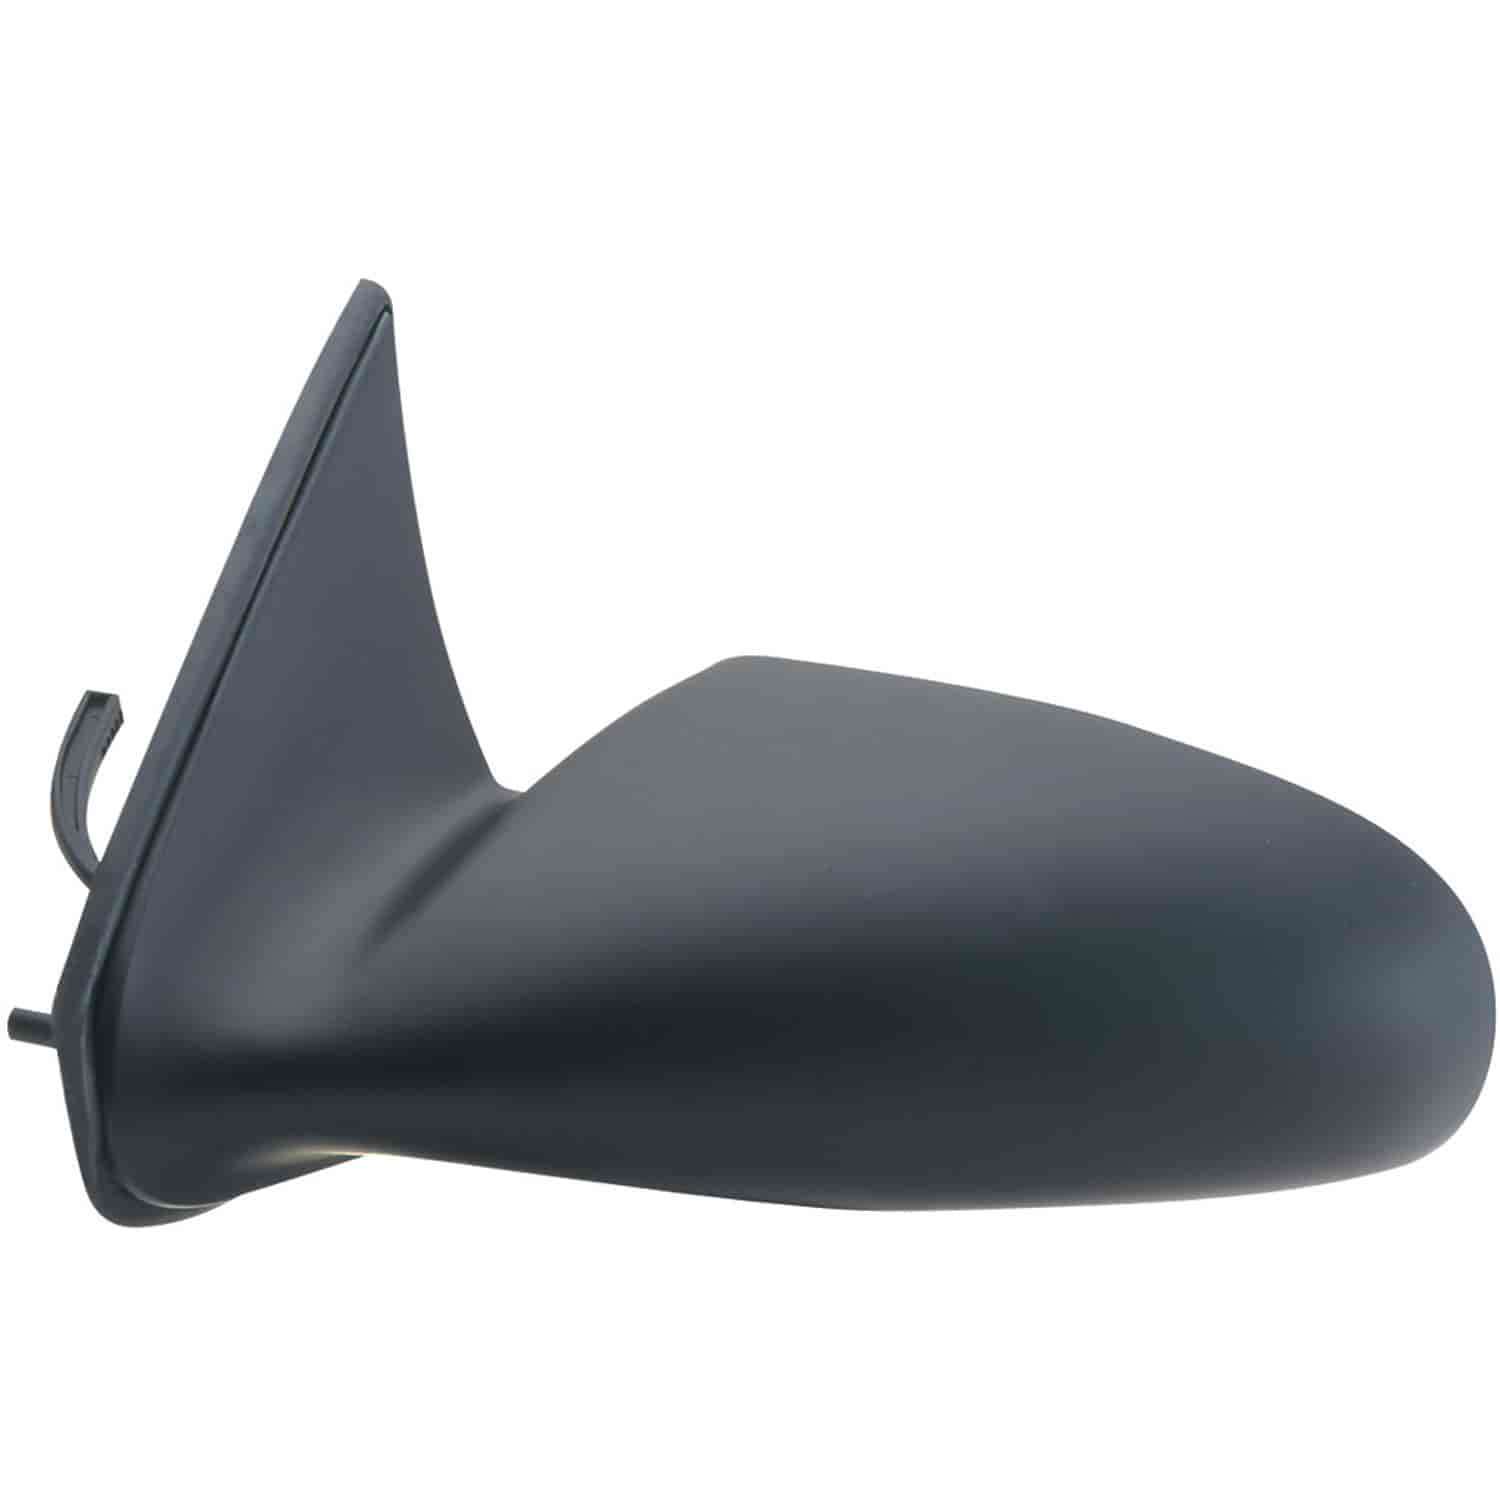 OEM Style Replacement mirror for 89-94 Chevy Sprint GEO Metro driver side mirror tested to fit and f